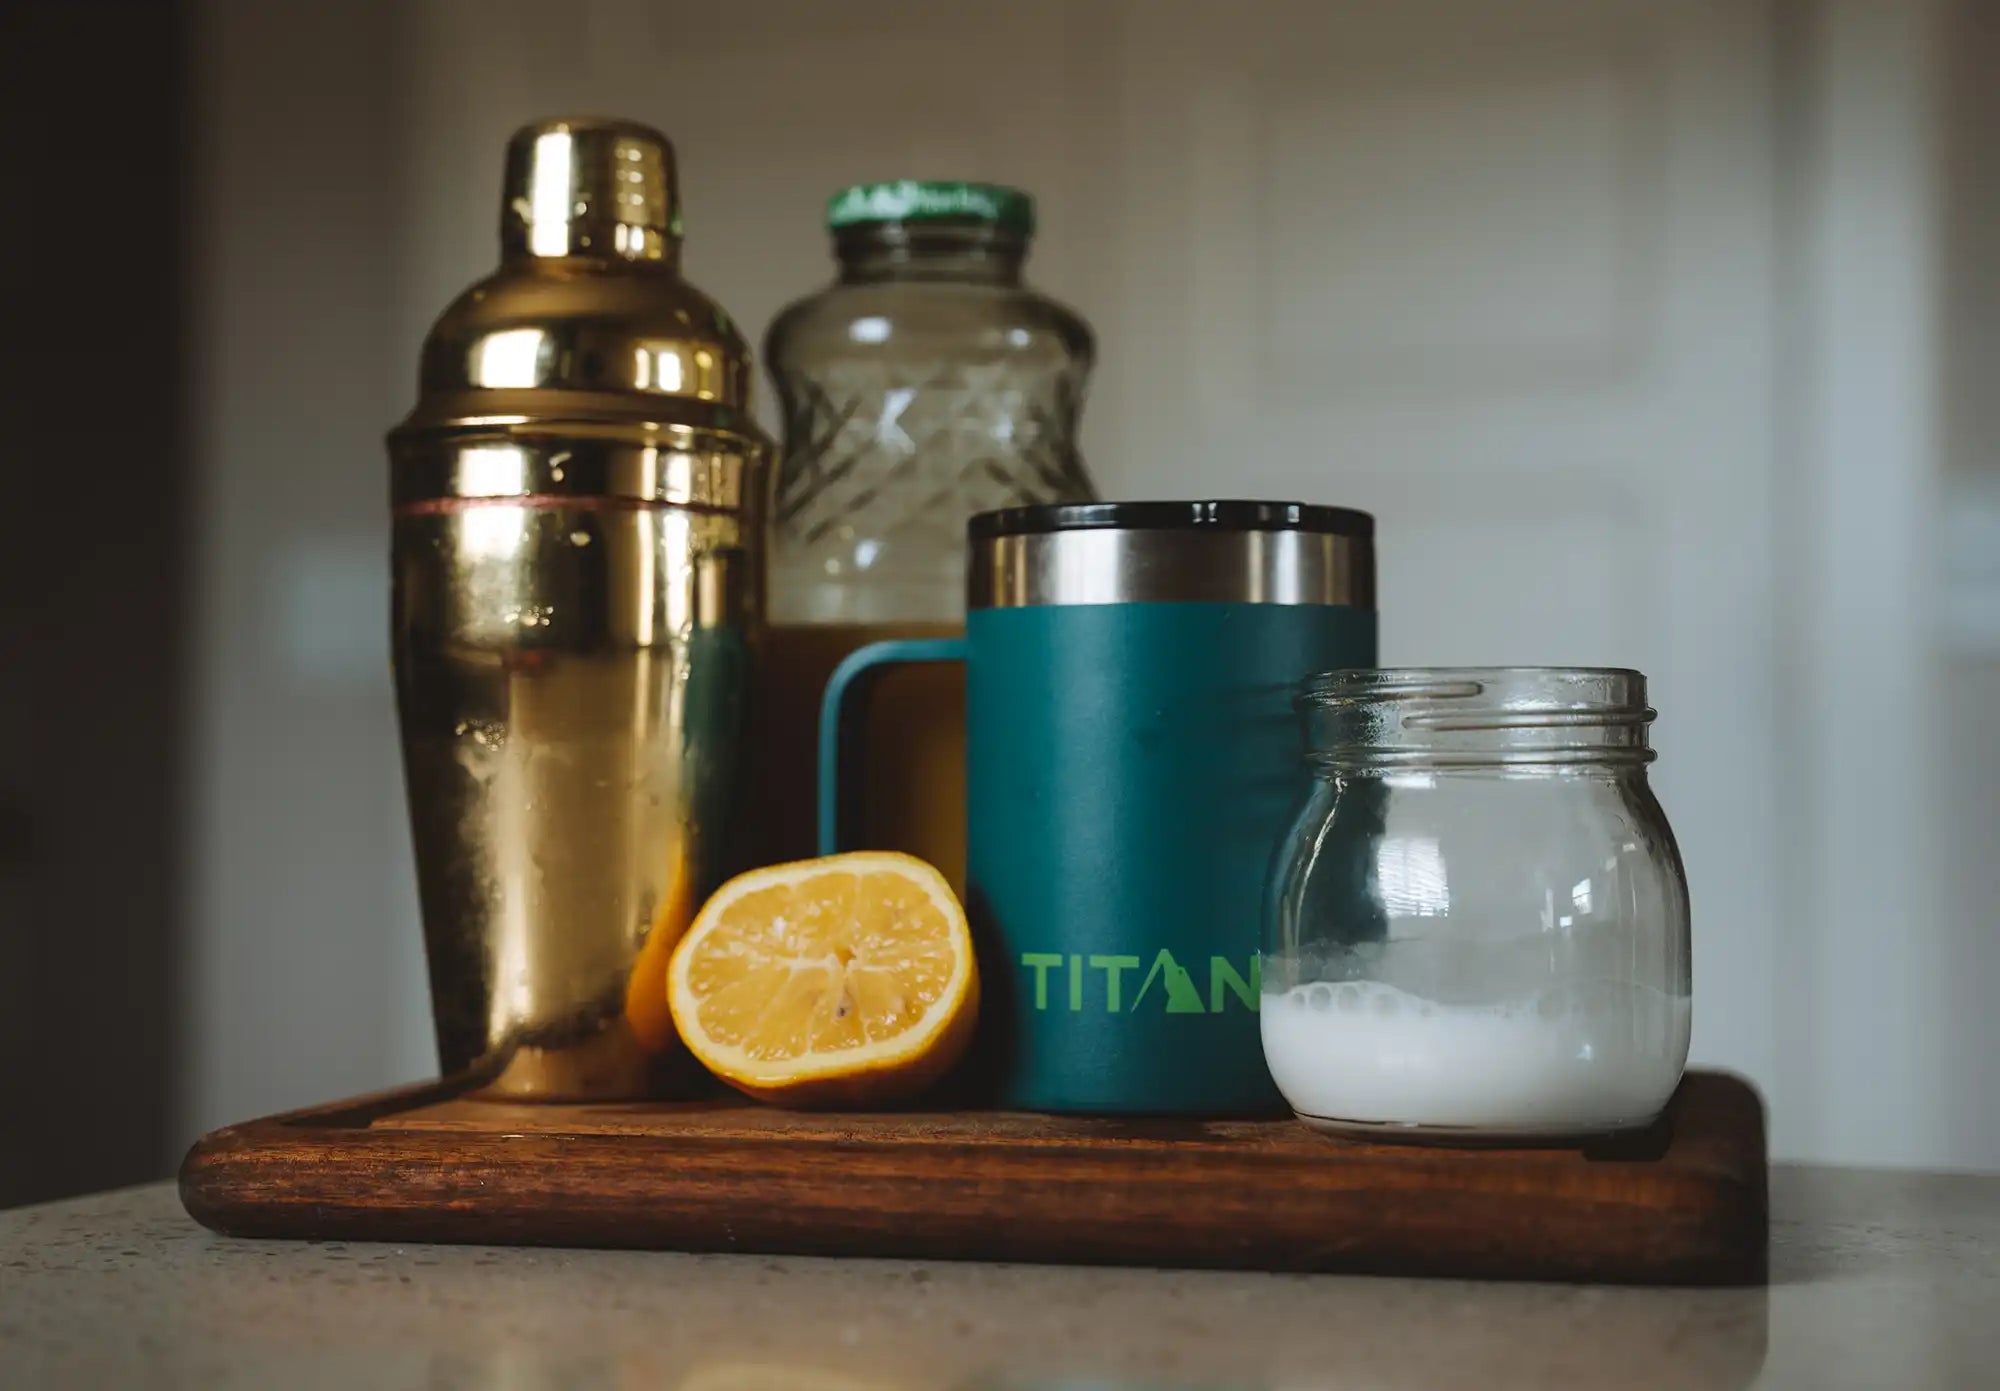 Cocktail shaker next to a Titan Mug and other ingredients.